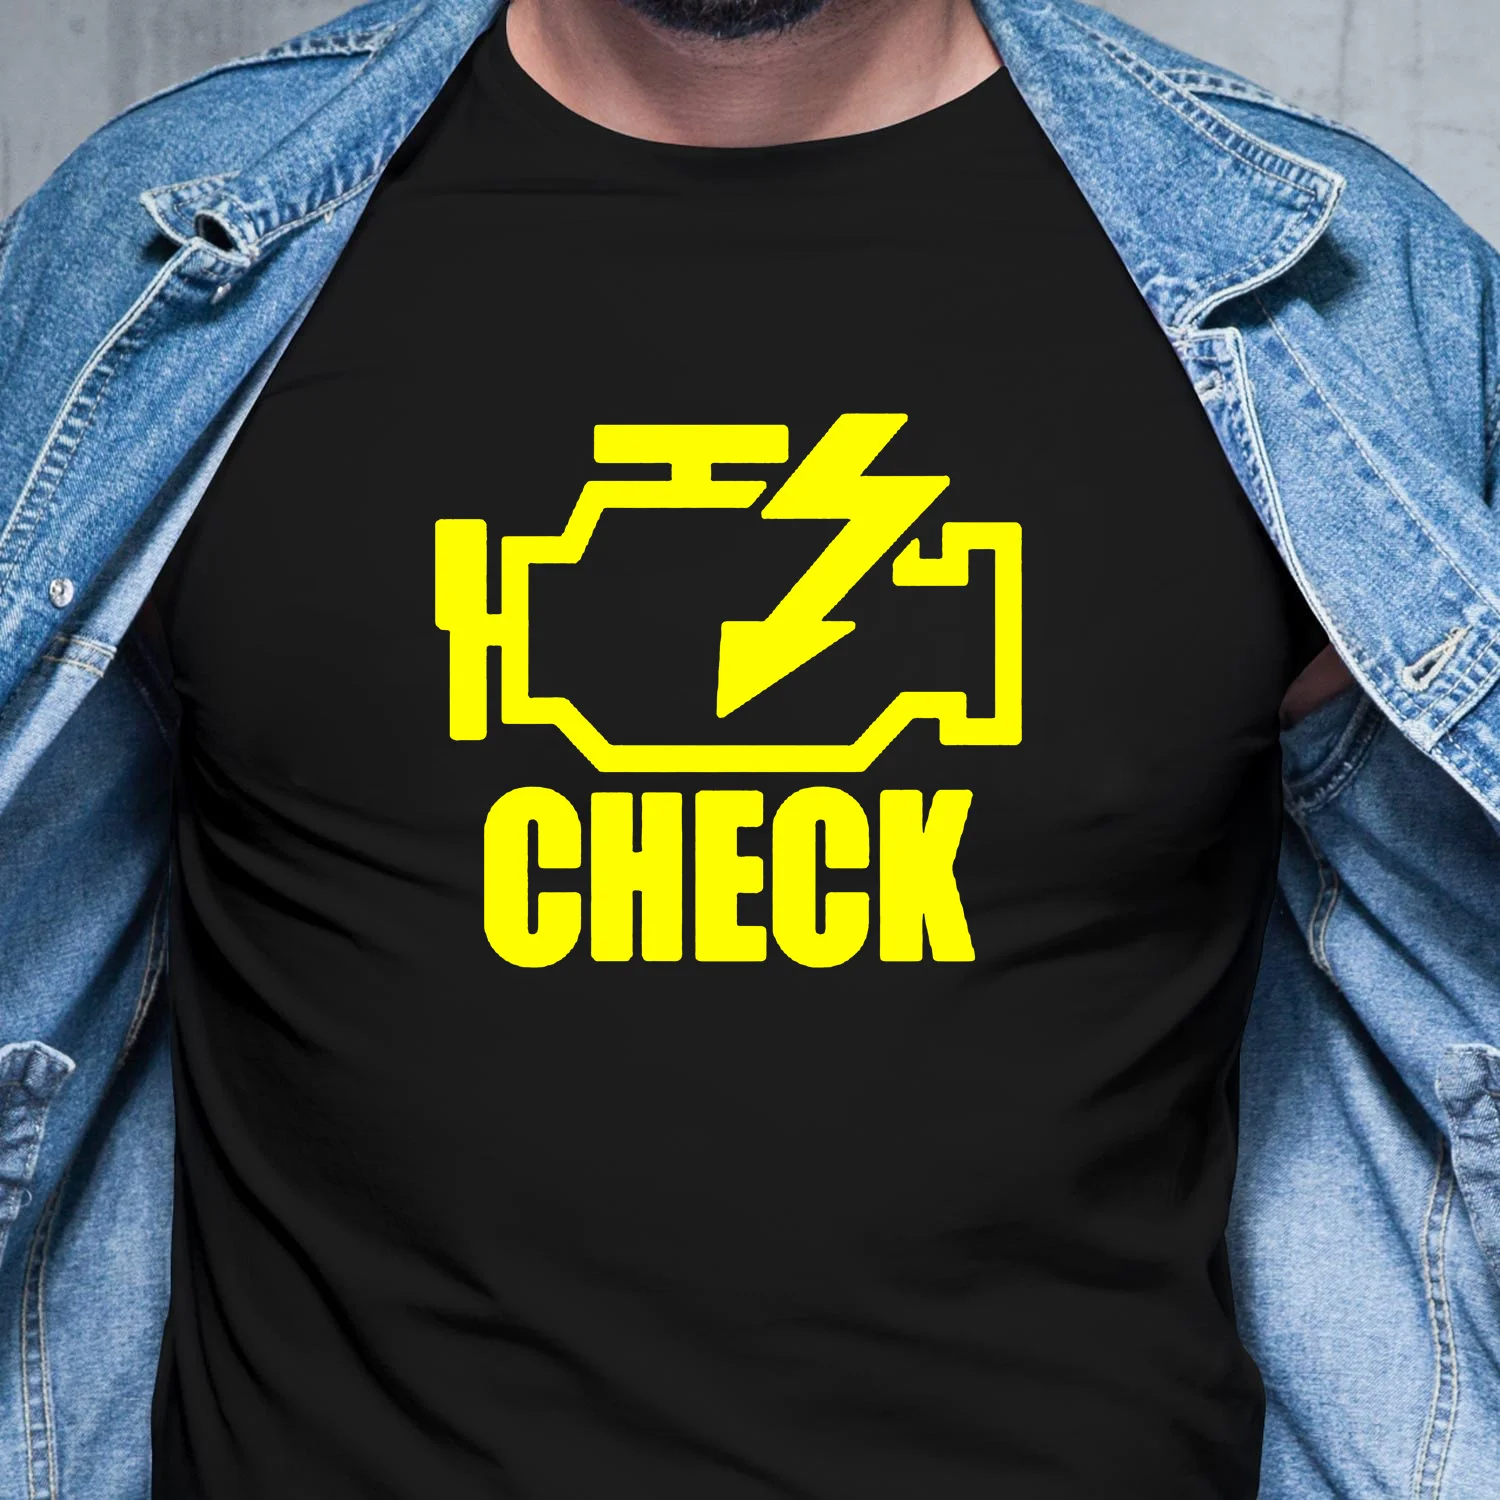 Mechanic Auto Repair Check Engine Light T-Shirt Funny Birthday Gift For Men Daddy Father Husband Short Sleeve Cotton T Shirt Tee